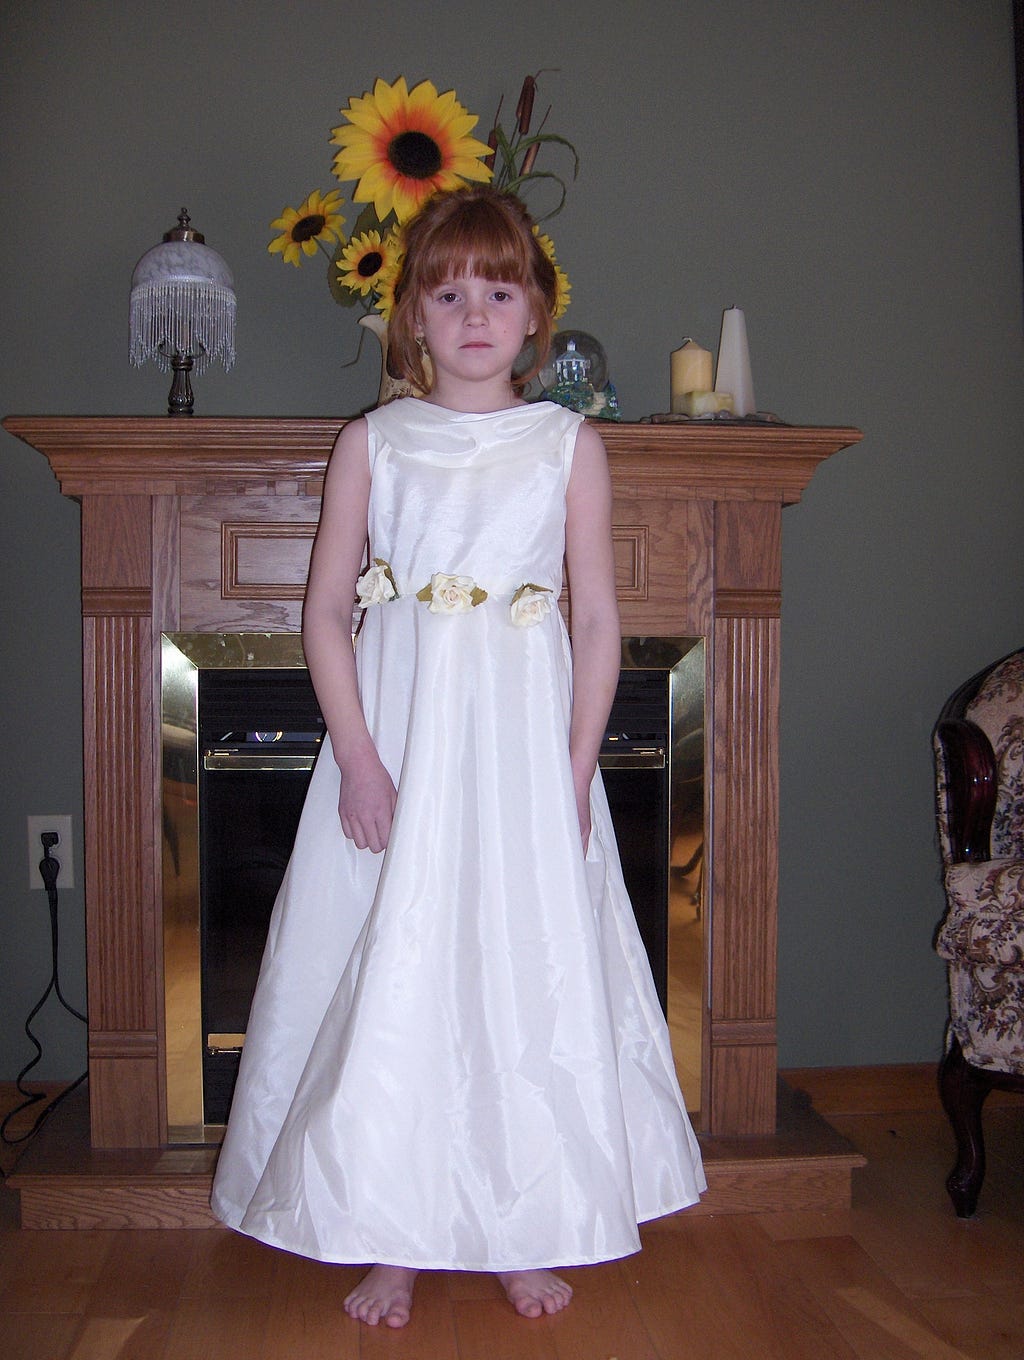 Young Fiona stands in front of a fireplace mantle in a white sleeveless dress. She is not smiling.